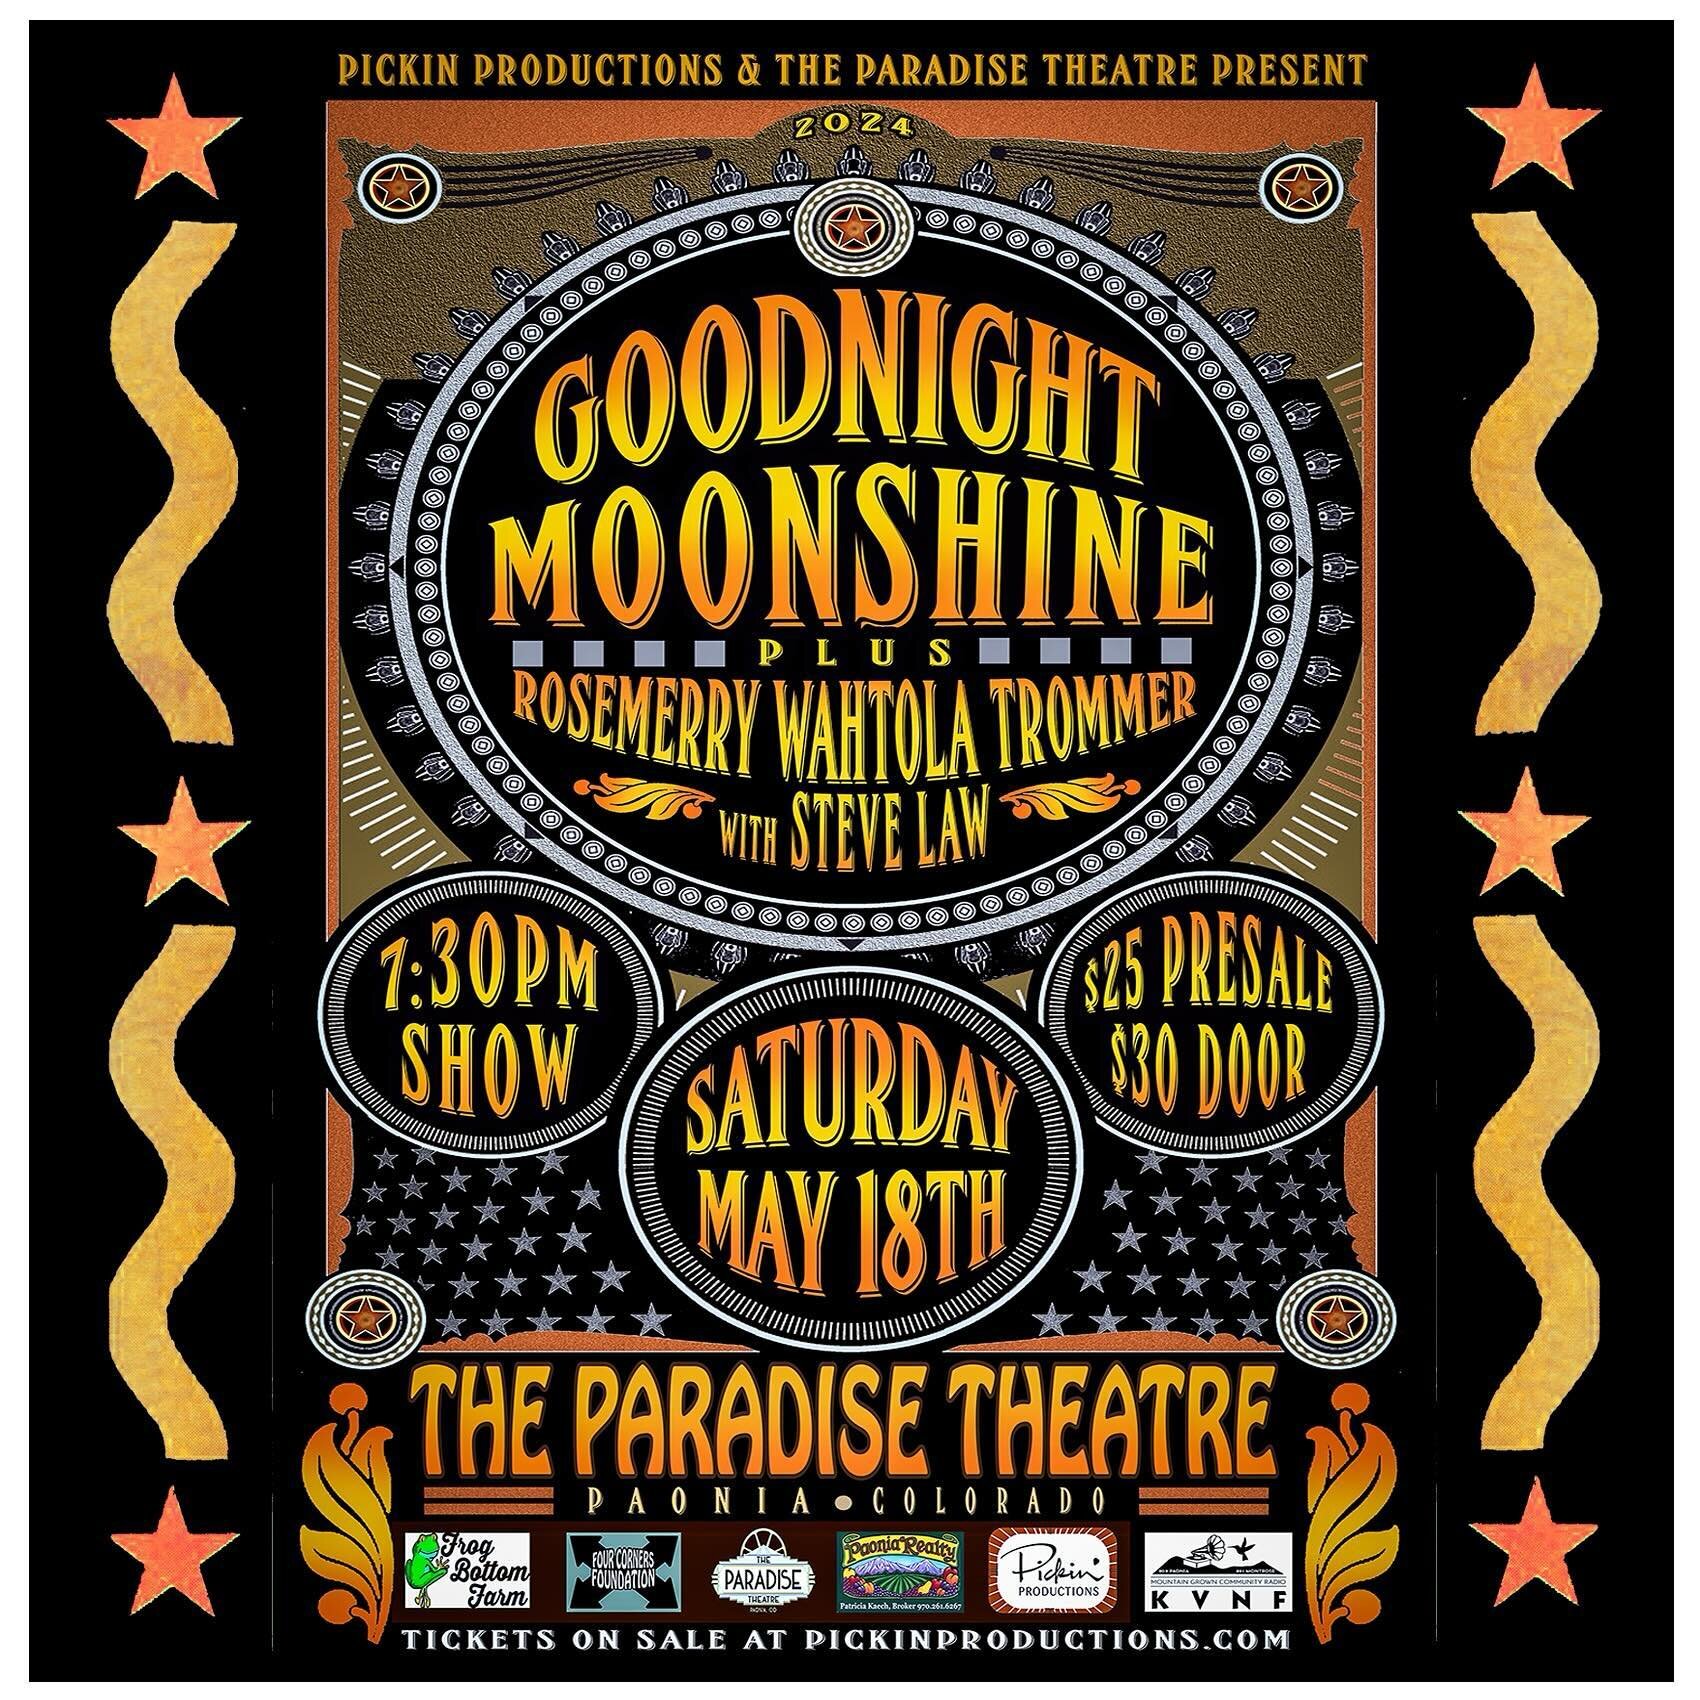 @pickinproductions and @paradisepaonia present another amazing night of music at the Paradise in Paonia, CO on May 18th featuring @gnightmoonshine with special guest @rosemerry.trommer with @stevelawmusic 🎶 💃 

Purchase tickets online in advance. L